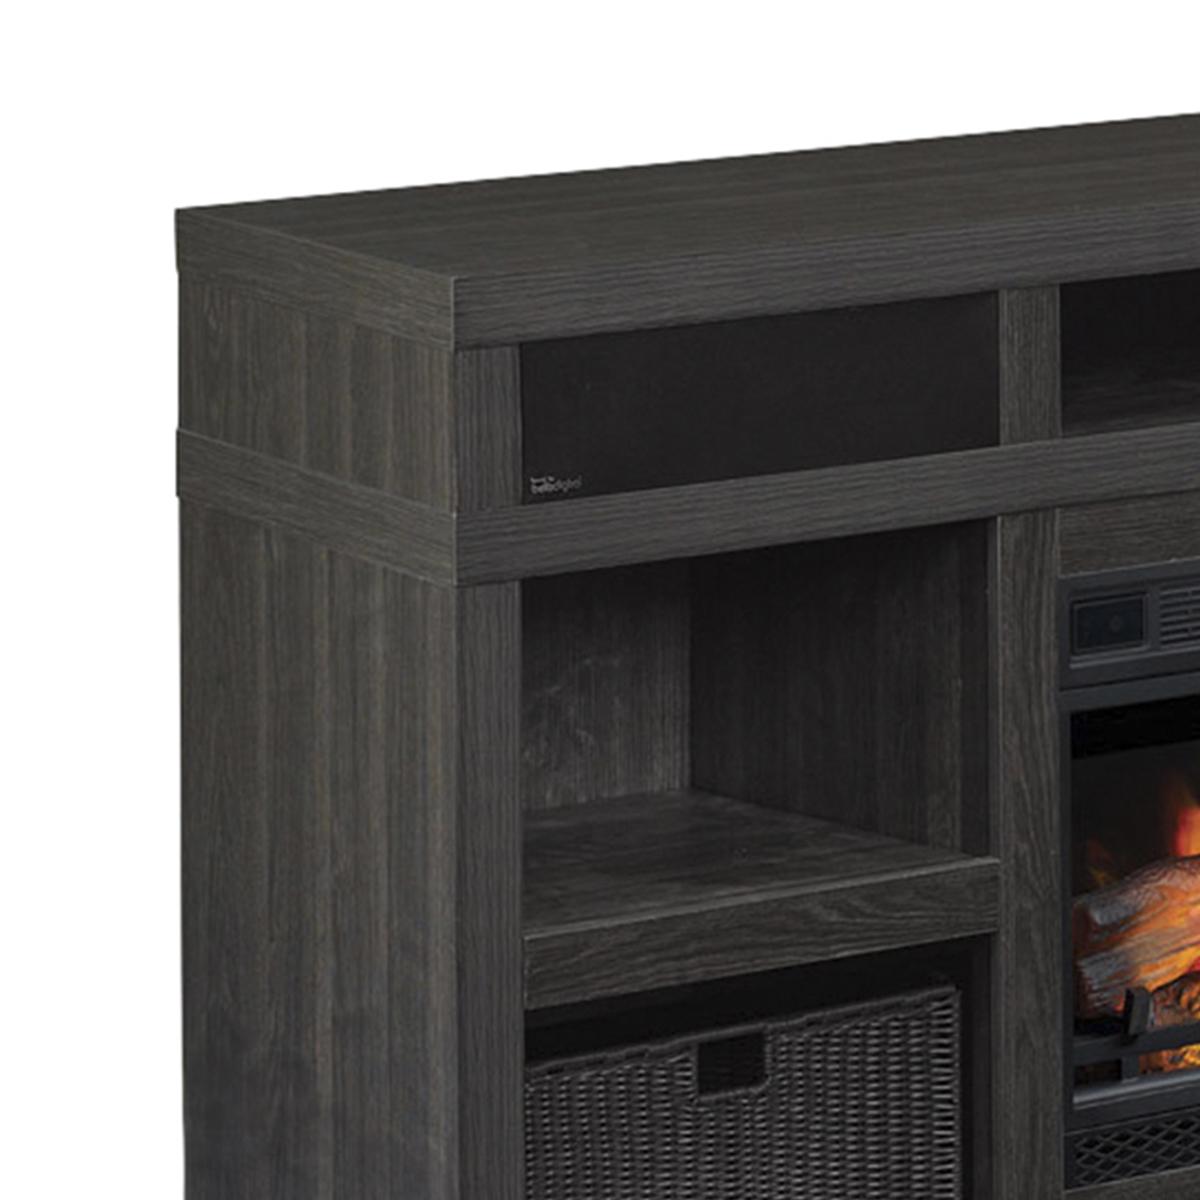 Fire and Ice Fireplace Awesome Fabio Flames Greatlin 64" Tv Stand In Black Walnut